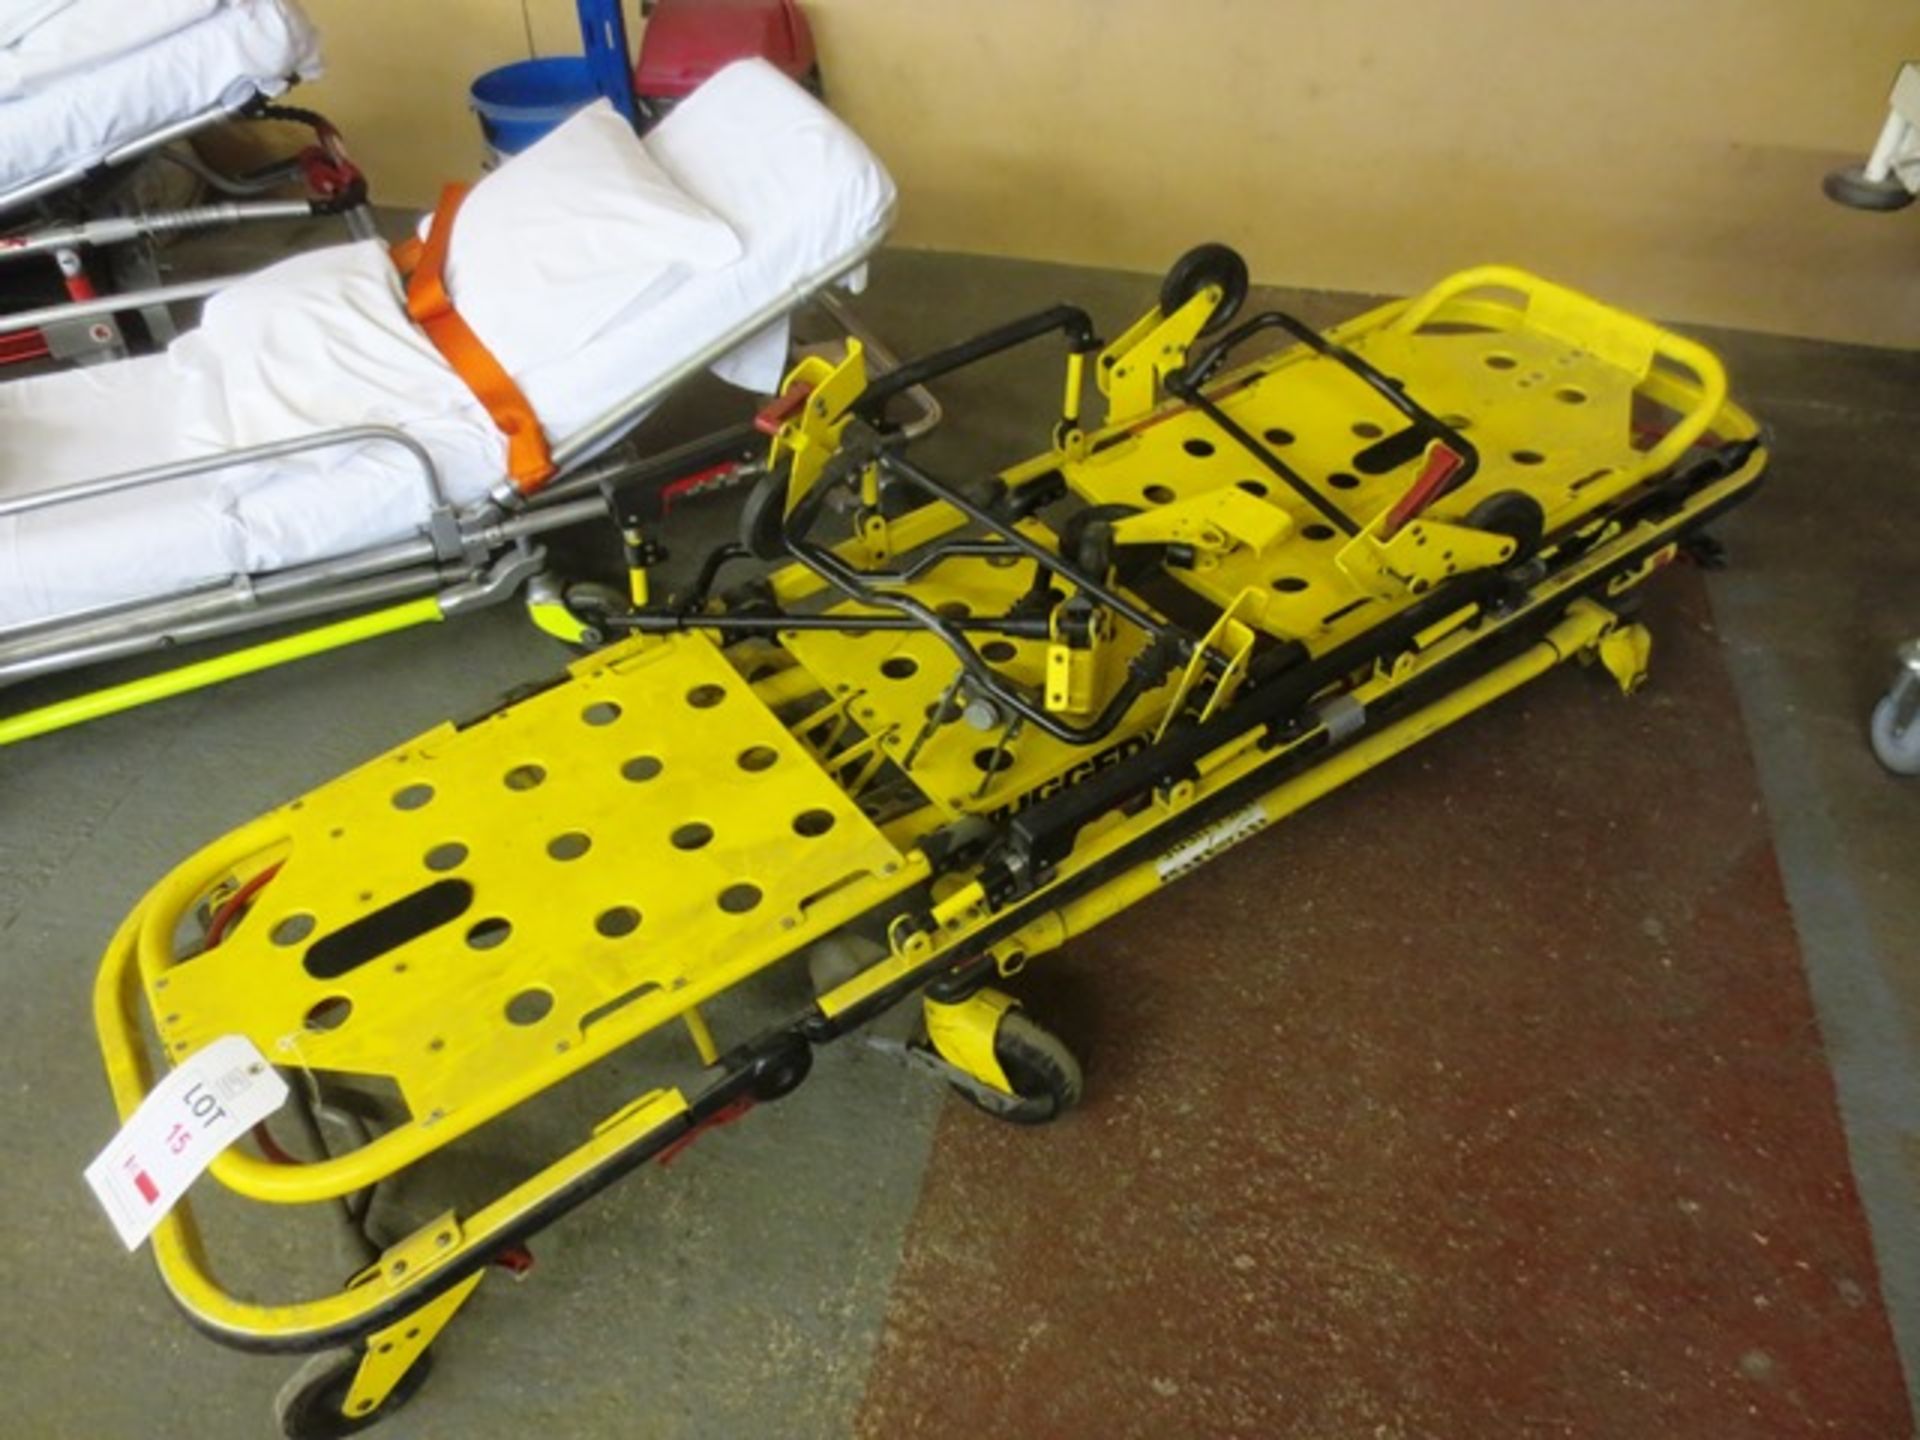 Stryker rugged mobile collapsible stretcher, 500lb capacity (Please note: for spares/repairs only,